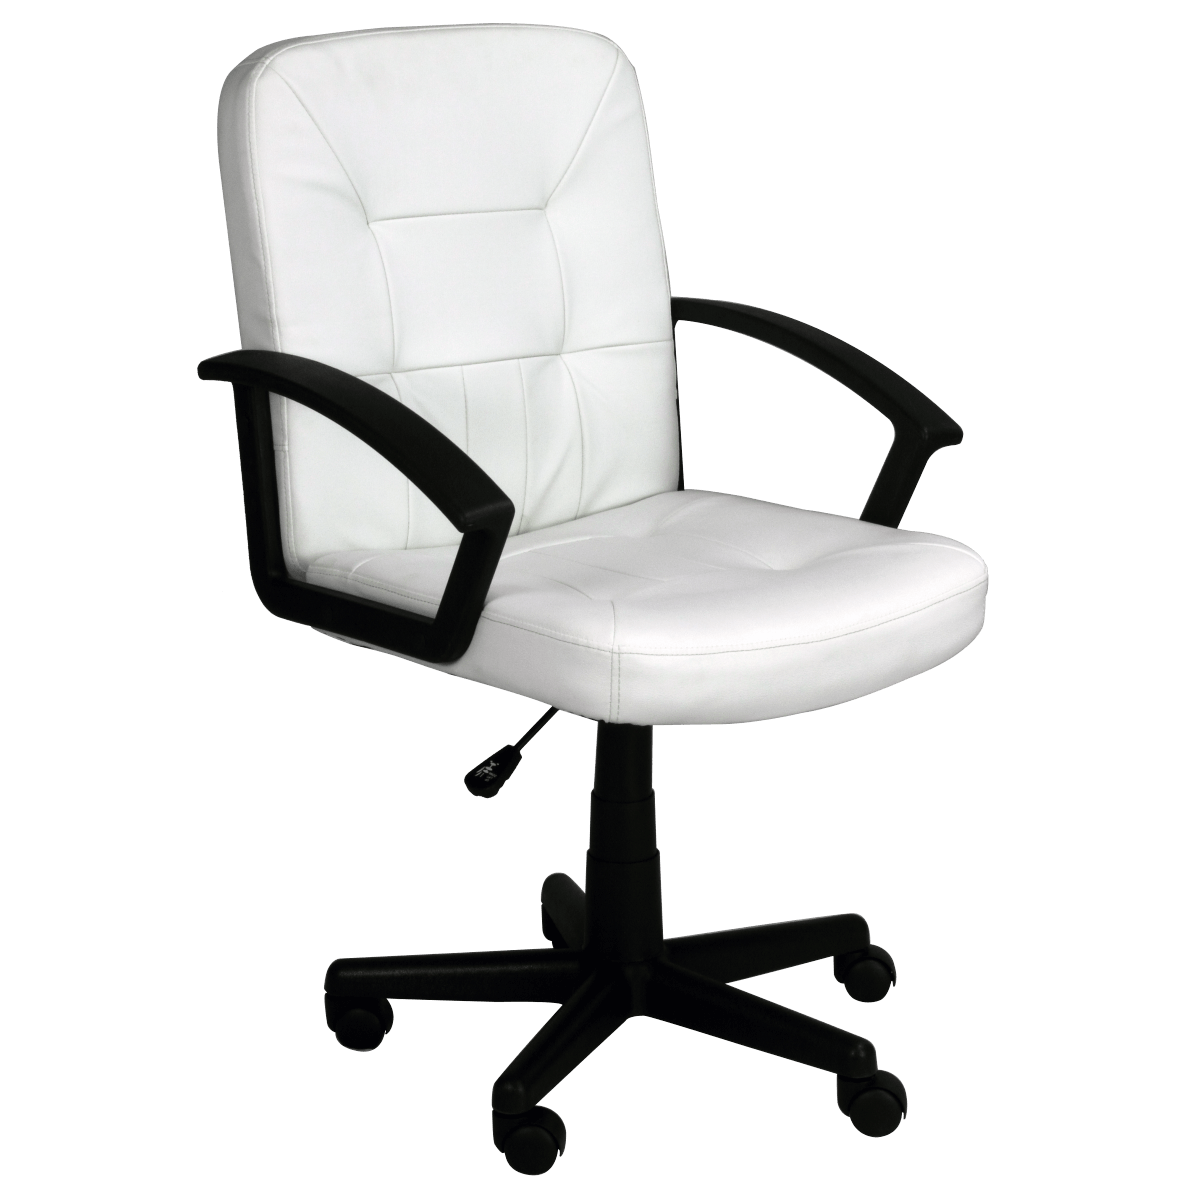 office-chair-png-png-image-collection